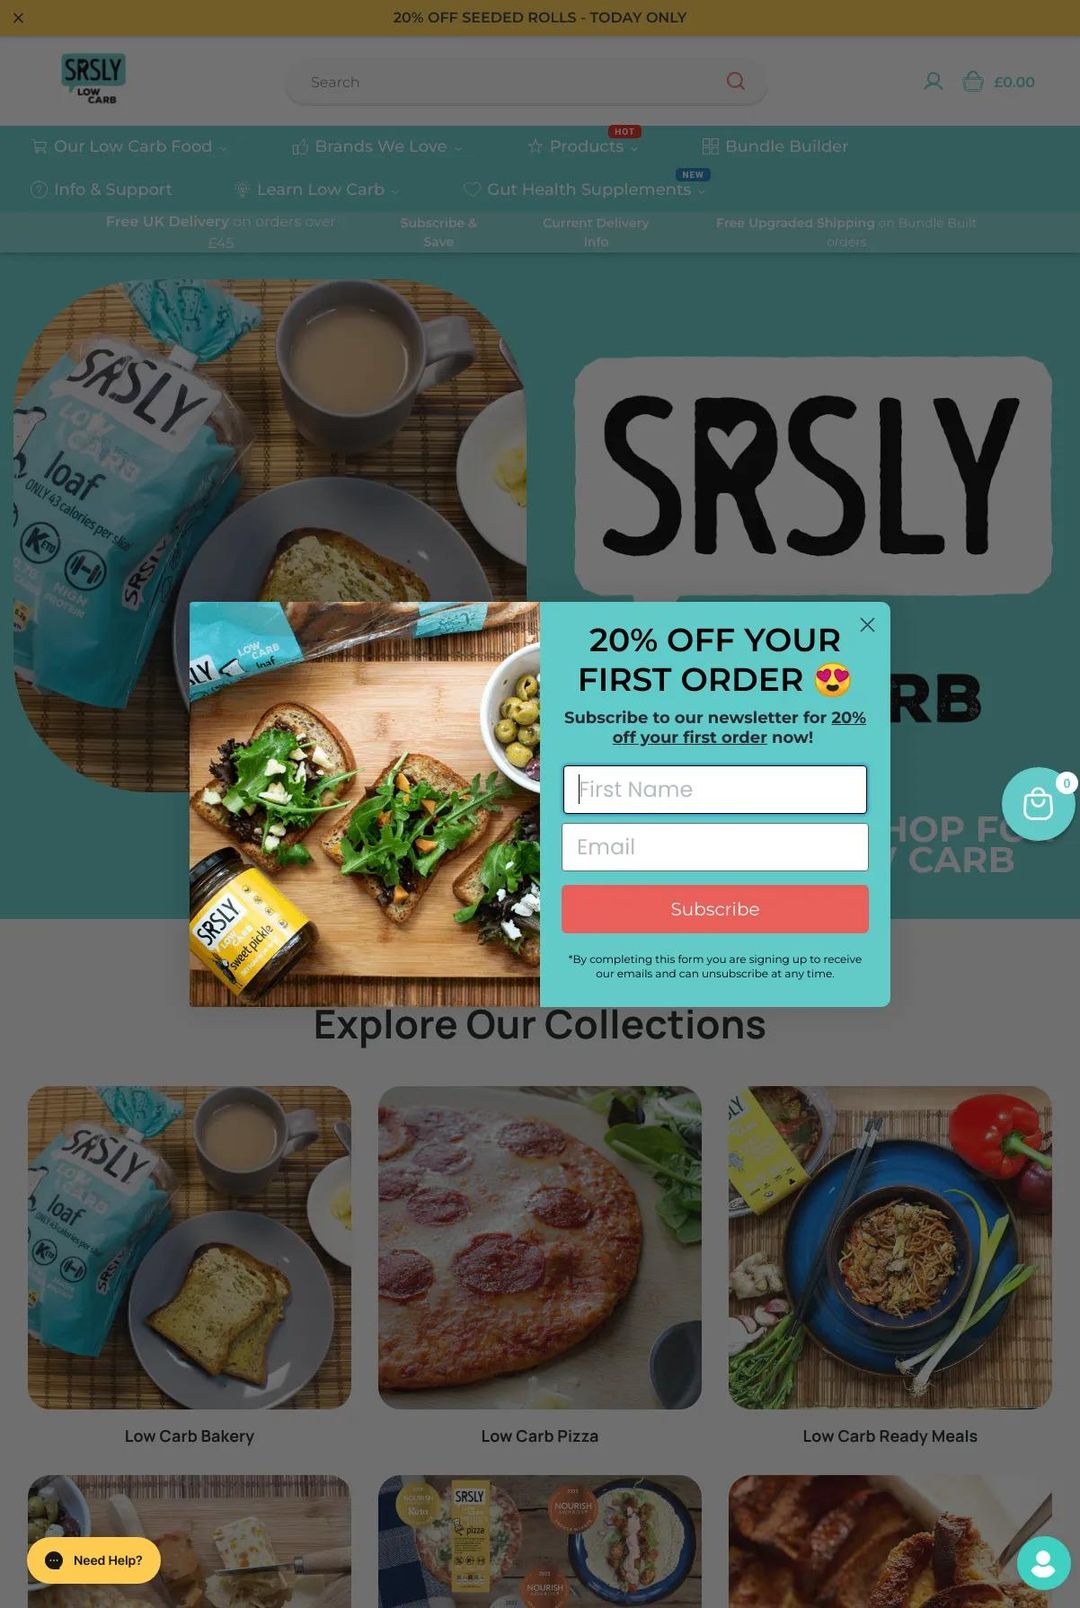 Screenshot 1 of Seriously Low Carb (Example Shopify Food and Beverage Website)